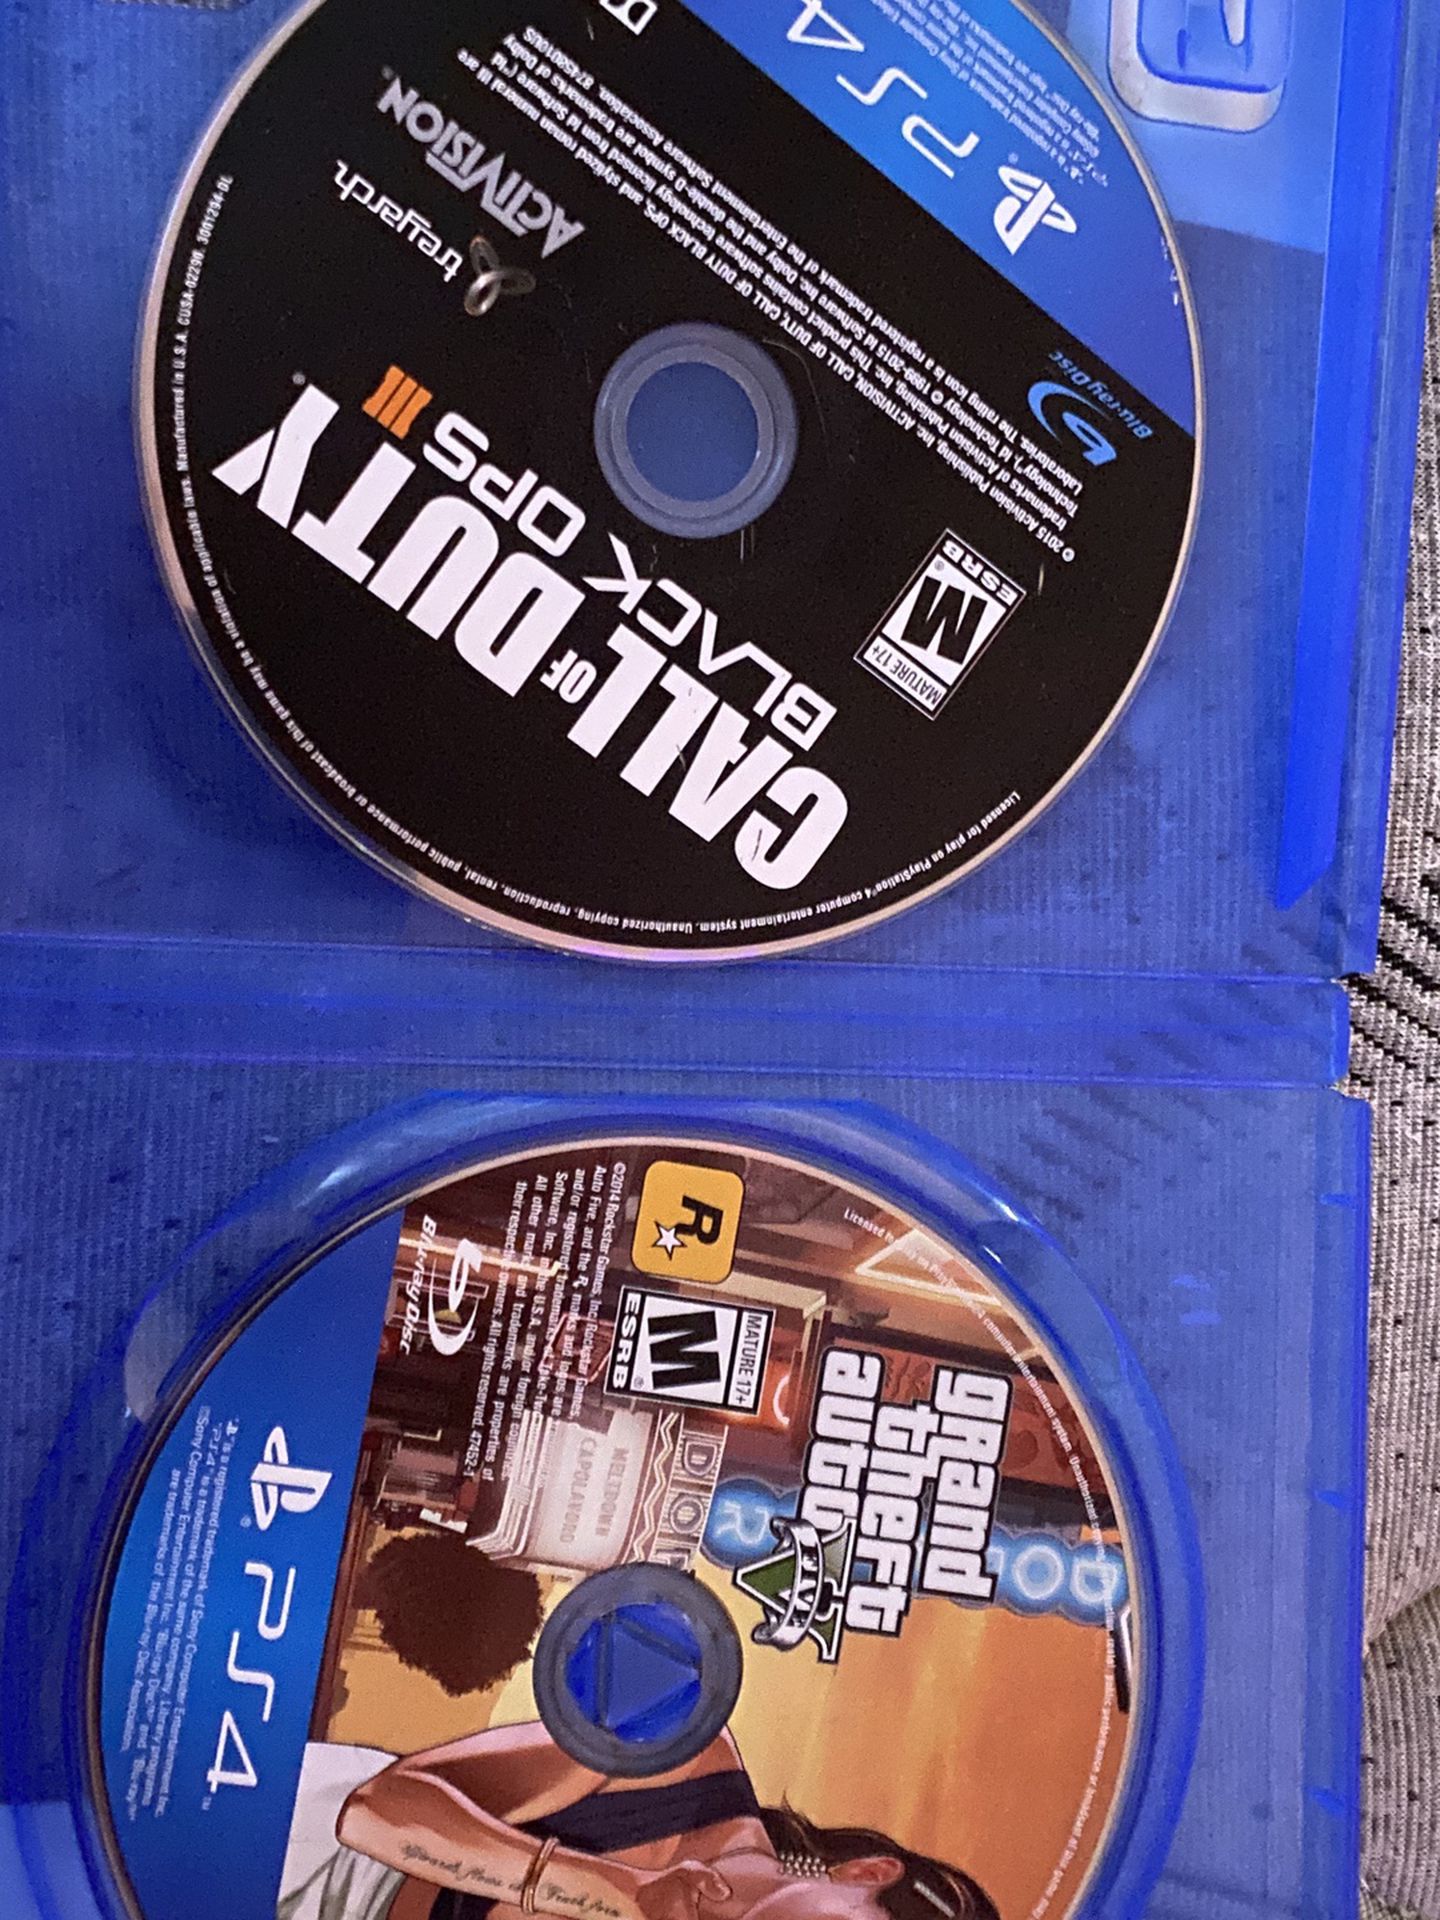 GTA V and Black Ops 3 For PS4